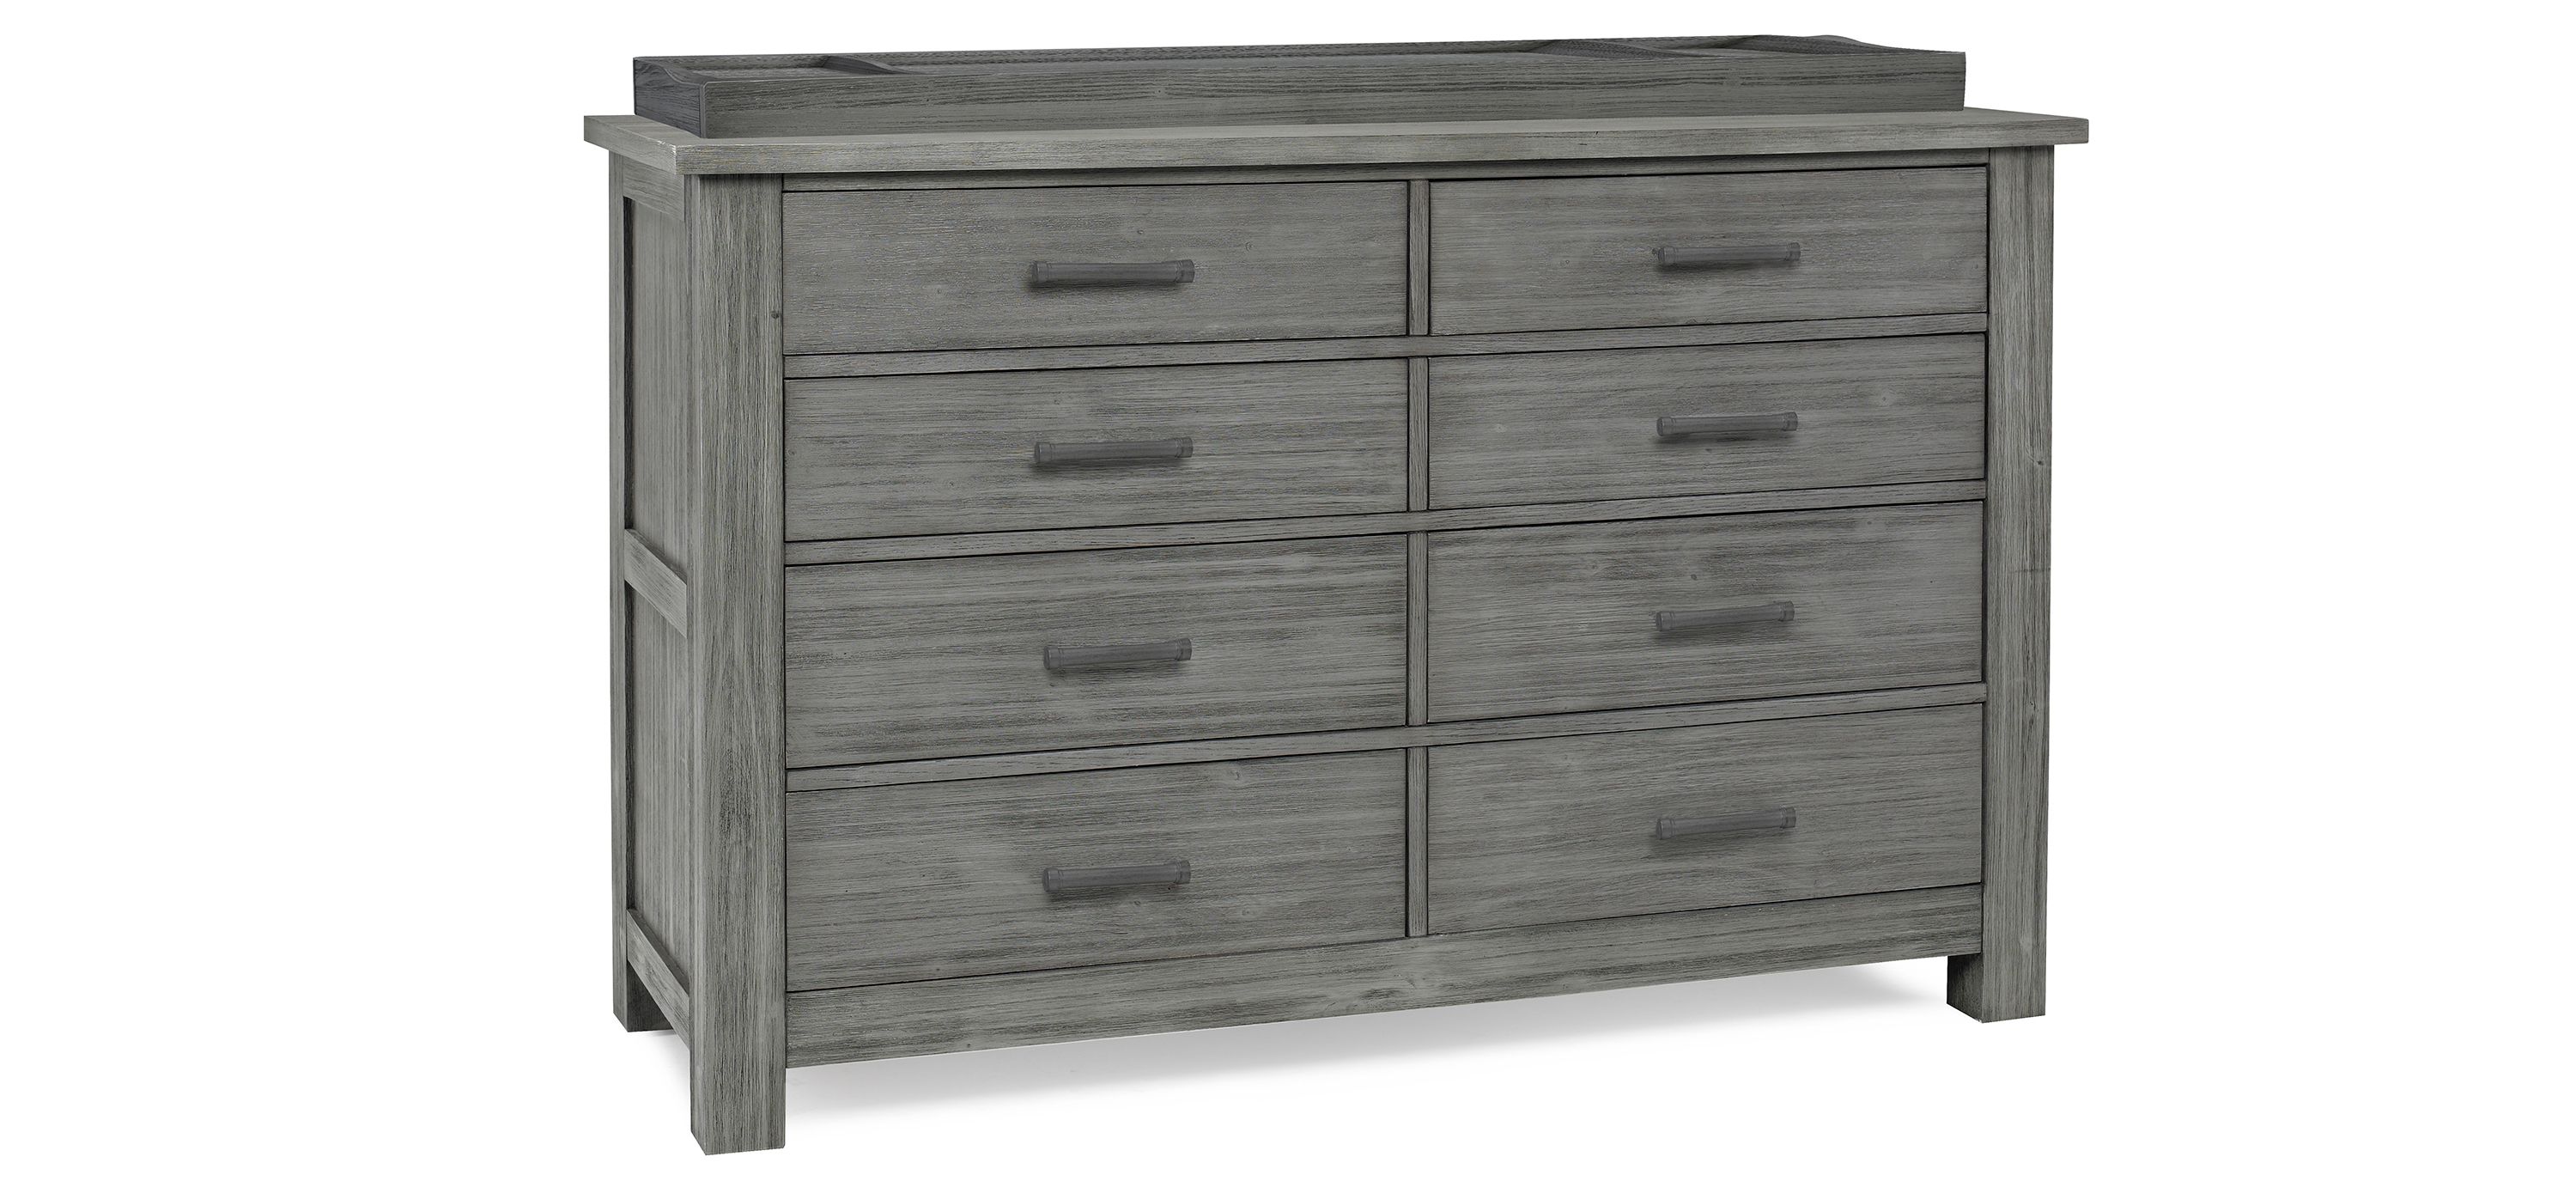 Dolce Babi Lucia 8 Drawer Dresser with Changing Tray